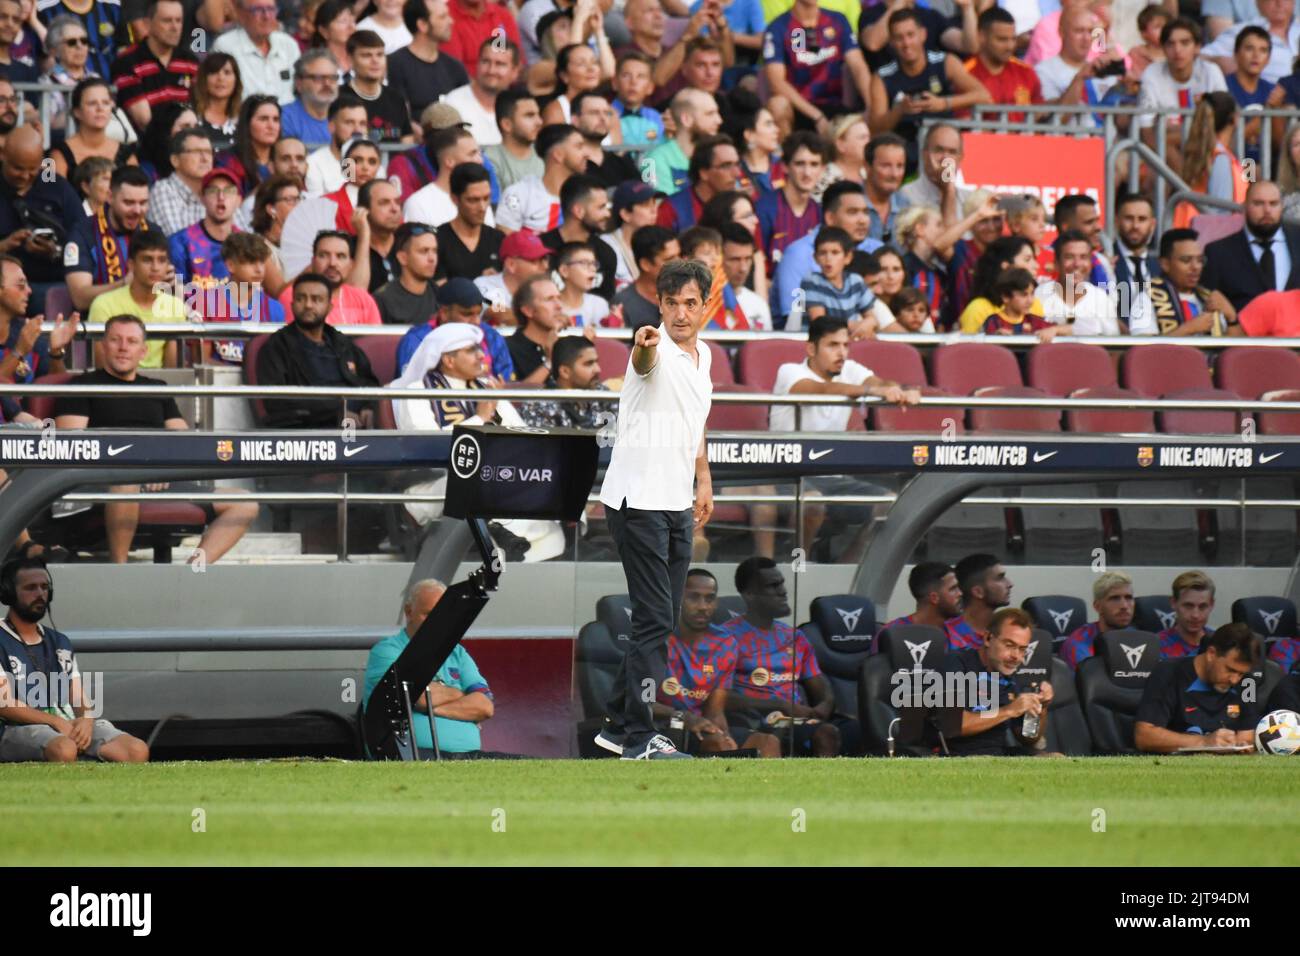 Barcelona, Spain. 28th Aug, 2022. BARCELONA, SPAIN - AUGUST 28: Juan José Rojo Martín, coach of Real Valladolid CF during La Liga match between FC Barcelona  and Real Valladolid CF at Barcelona on August 28, 2022 in Spotify Camp Nou Stadium, England. (Photo by Sara Aribó/PxImages) Credit: Px Images/Alamy Live News Stock Photo